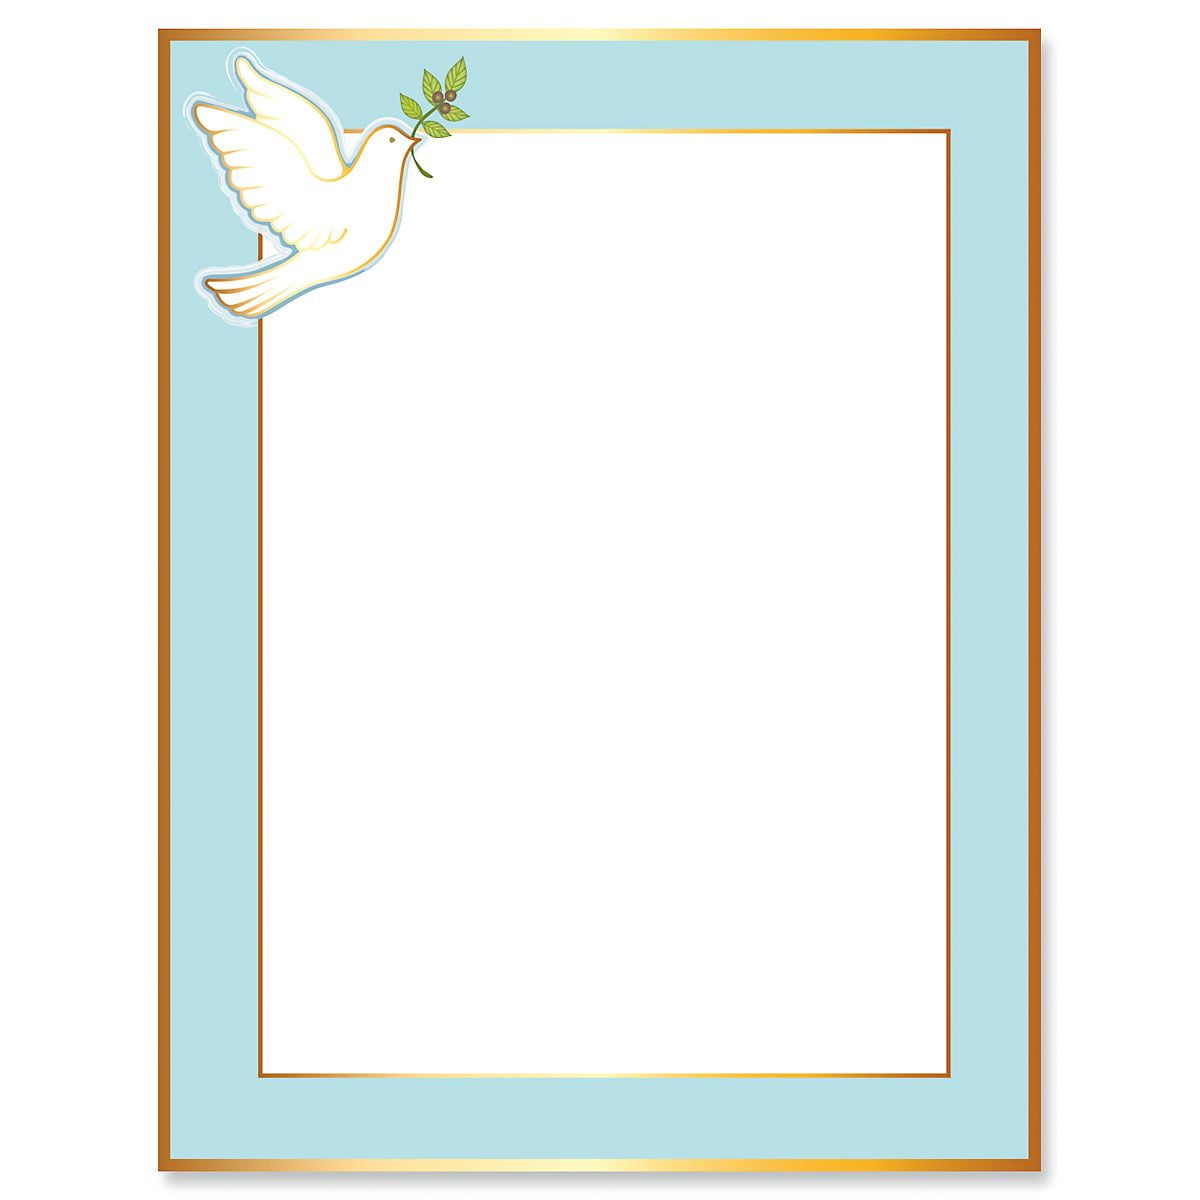 Christian Art Gifts Writing Paper & Envelope Stationery Set for